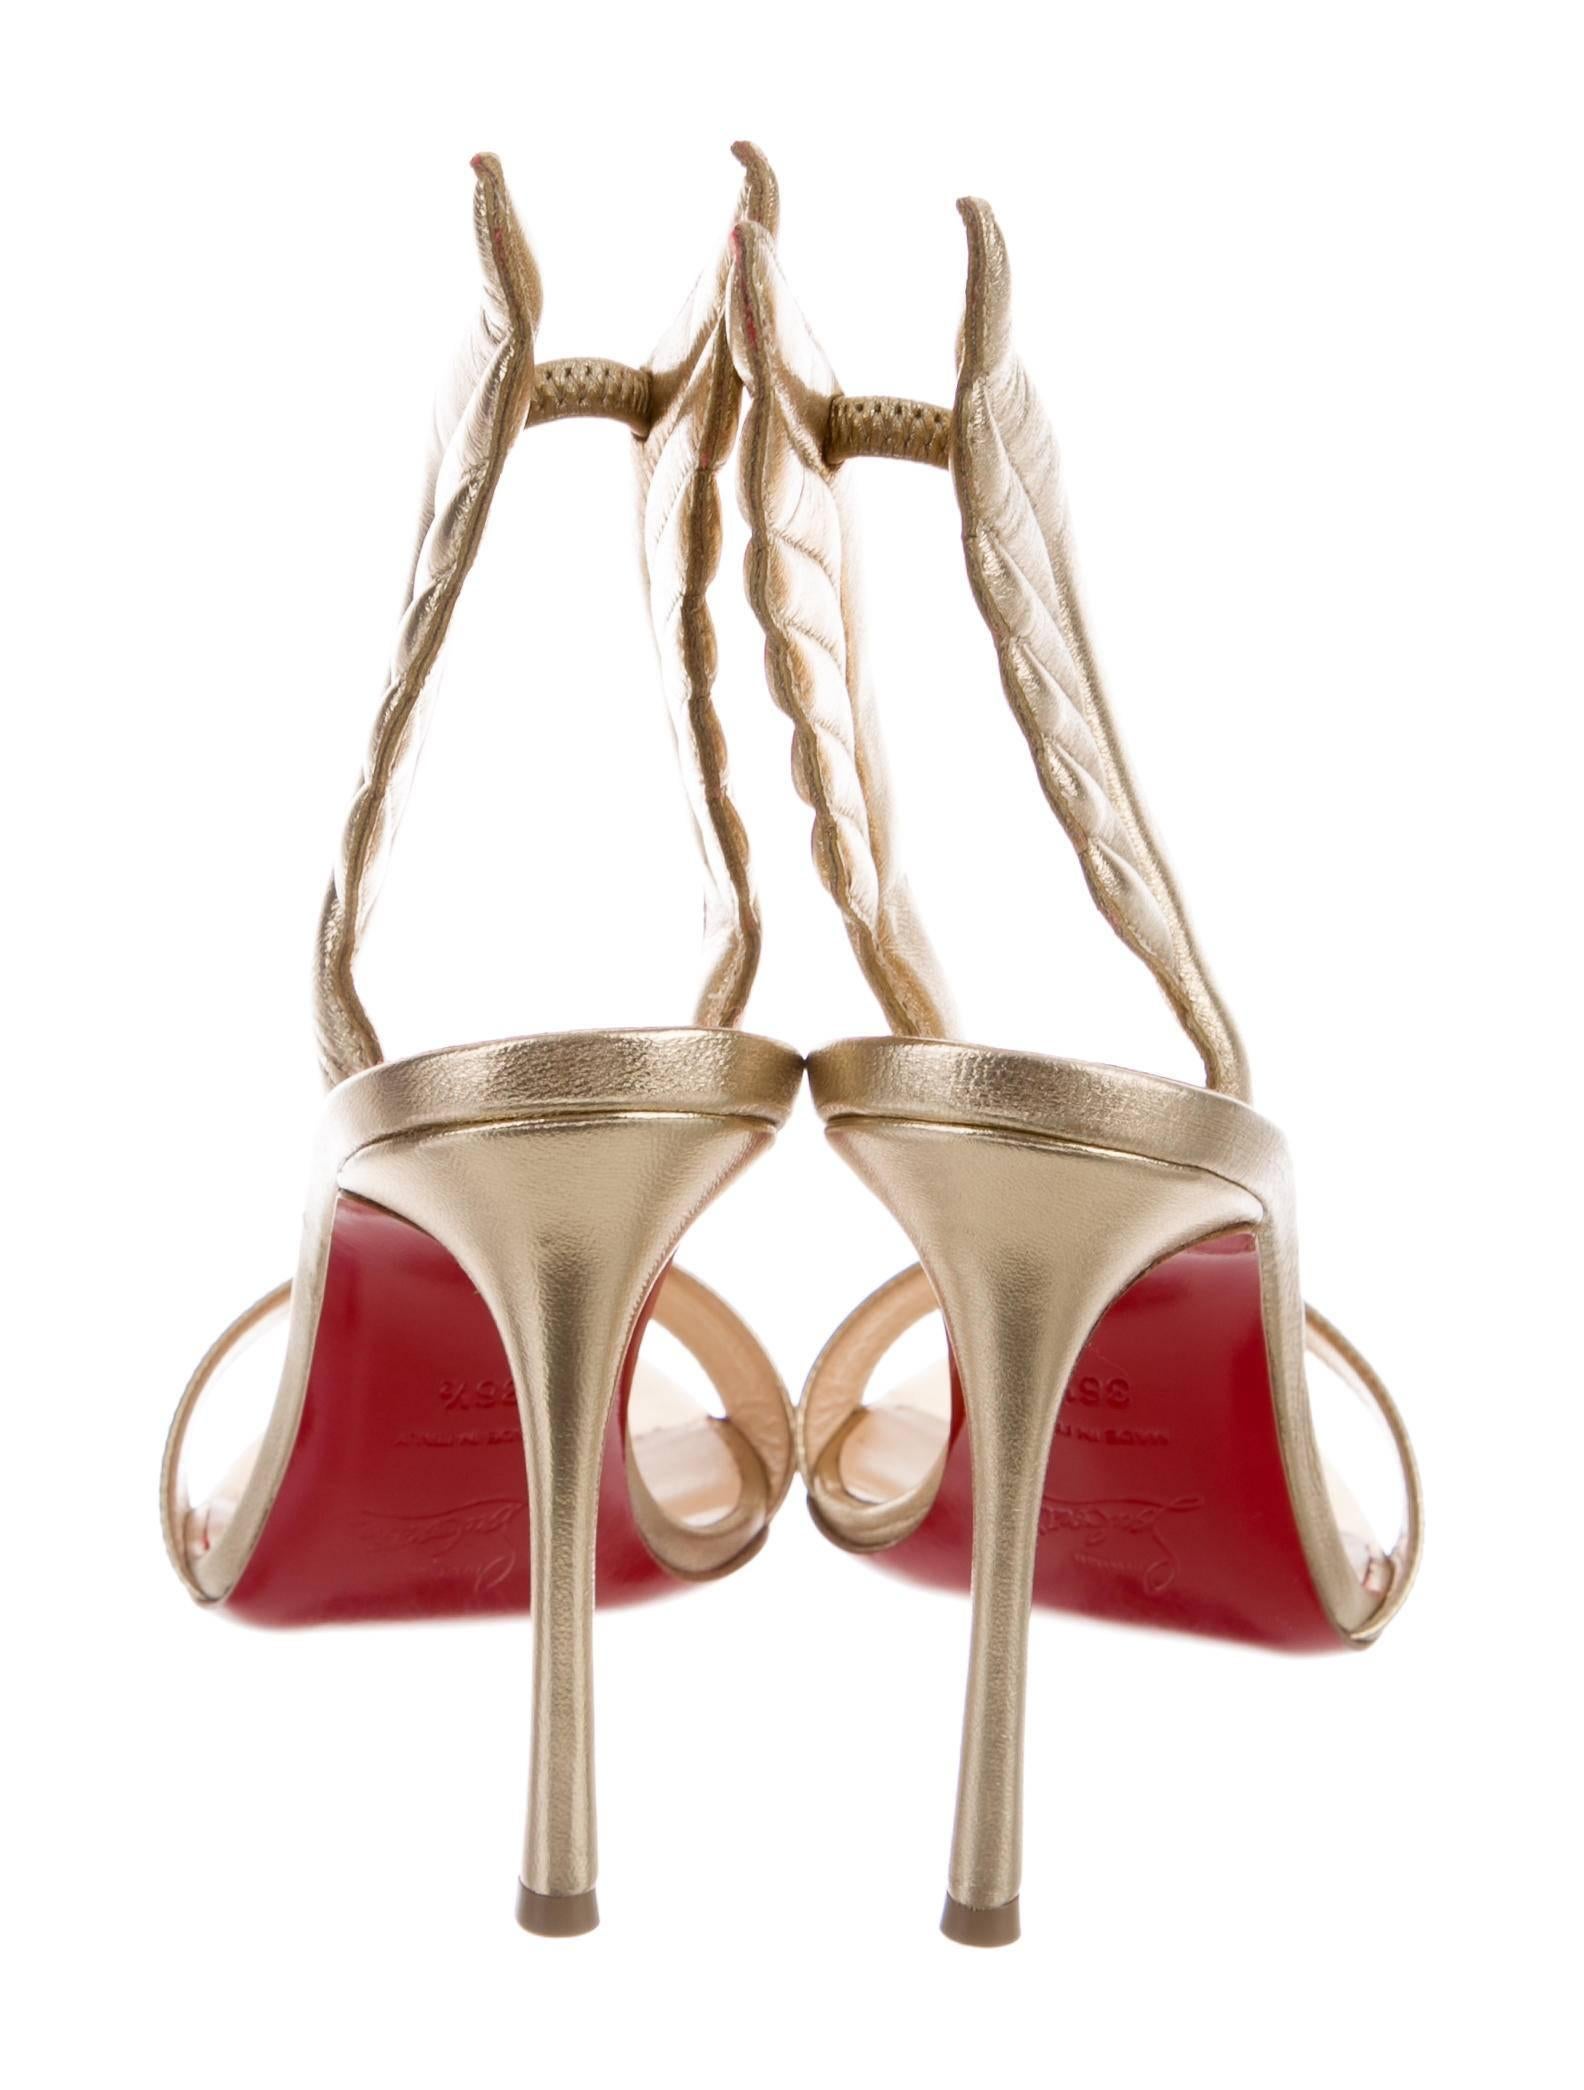 Women's Christian Louboutin NEW & SOLD OUT Gold Leather Futuristic Sandals Heels in Box